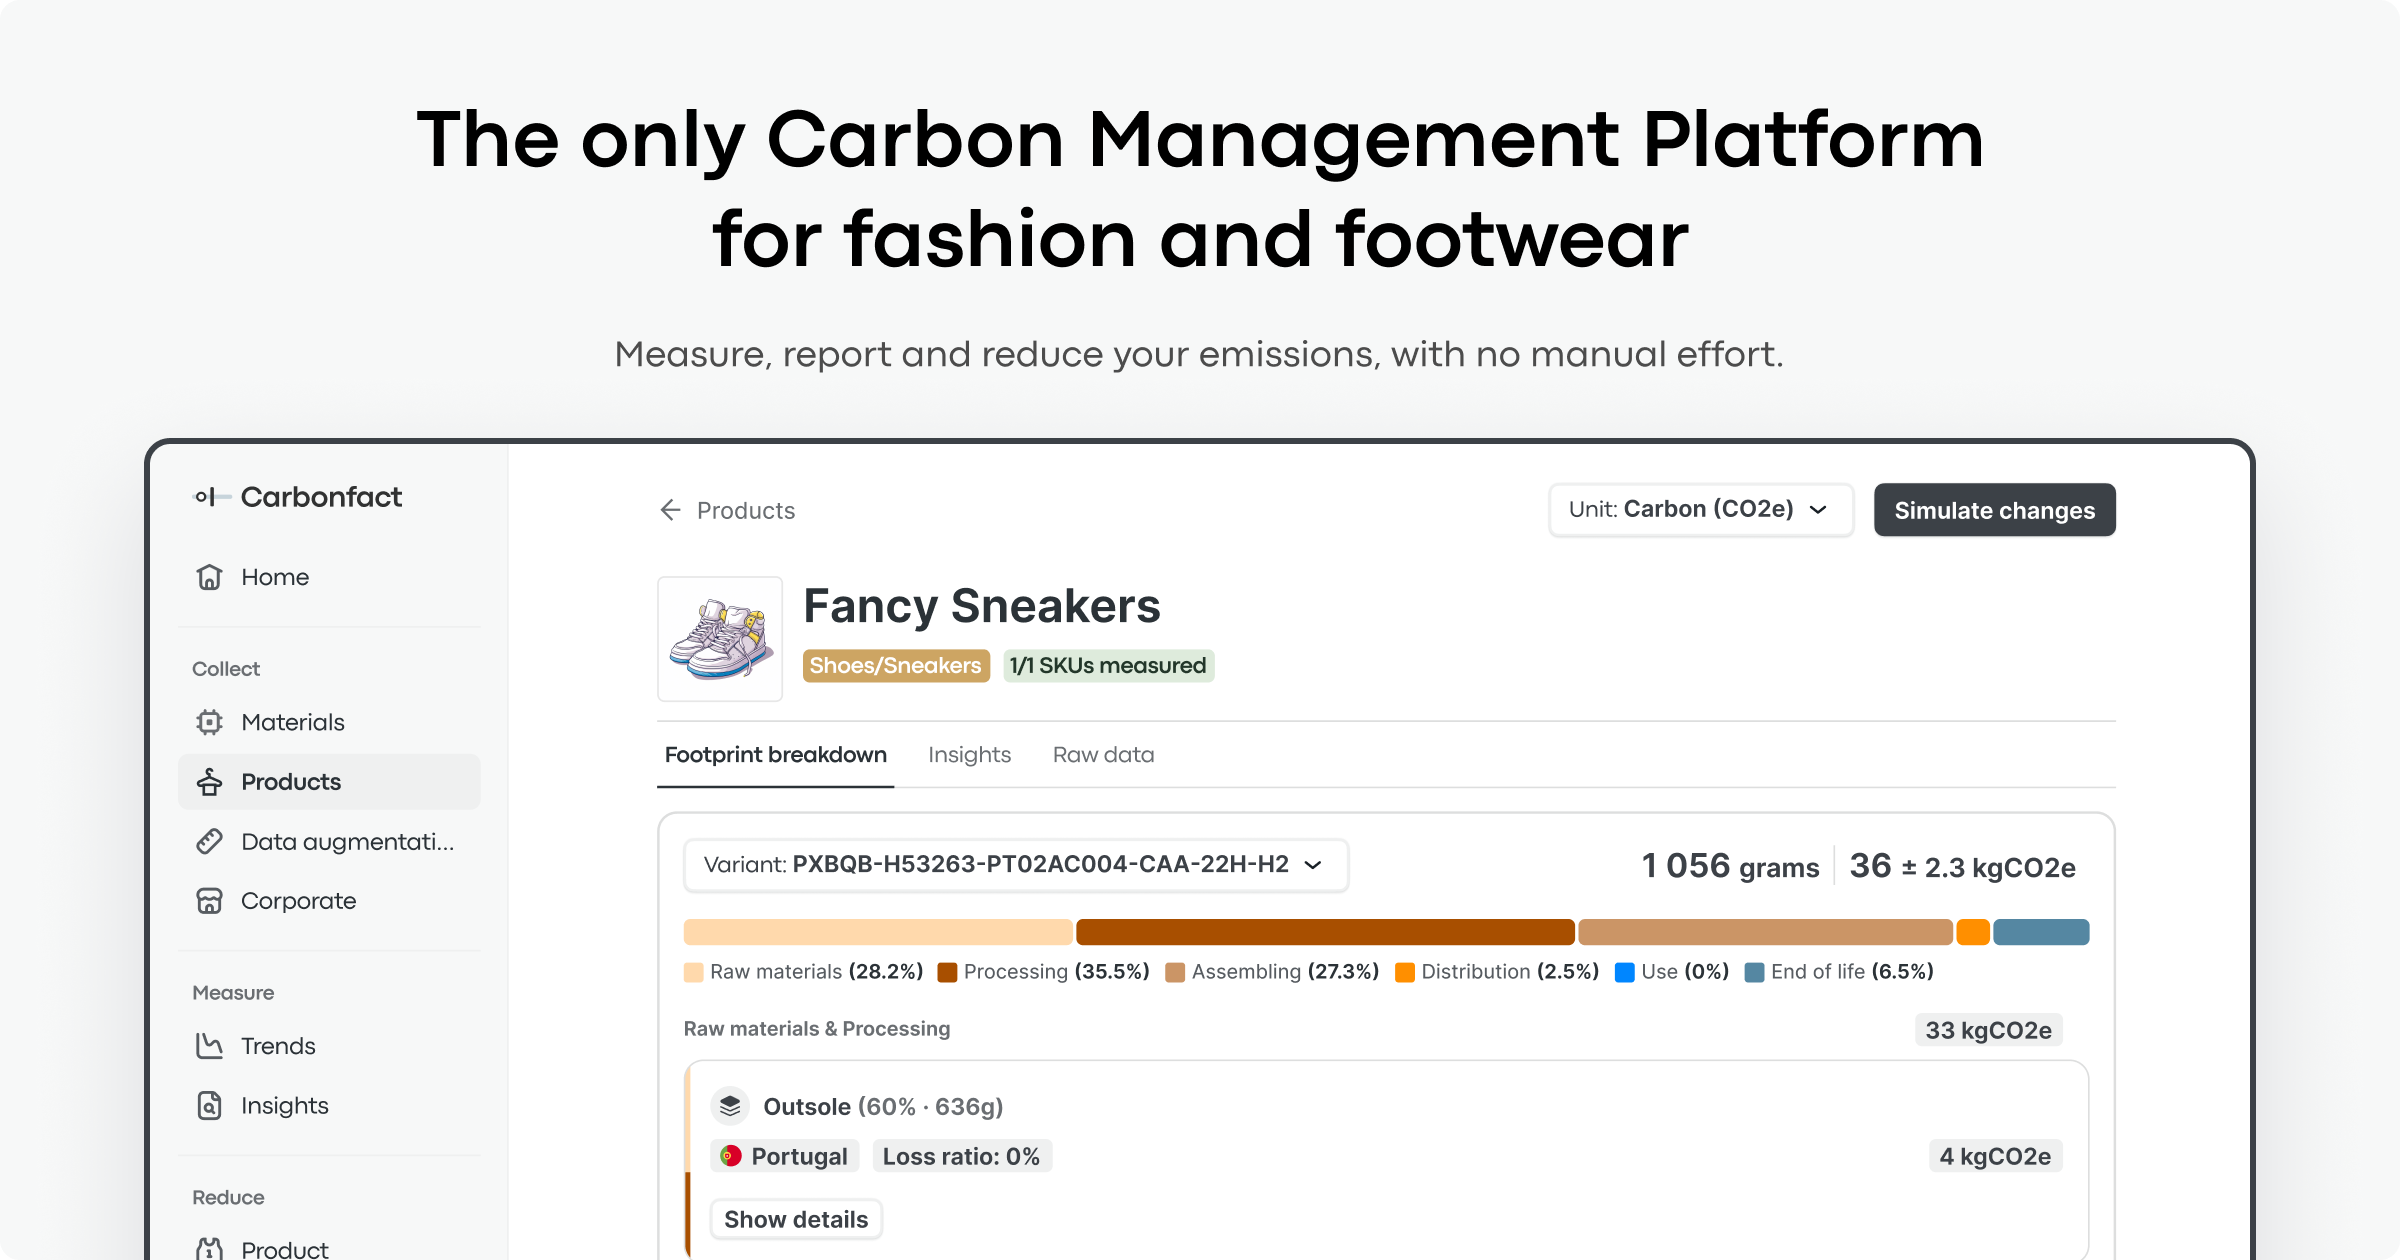 Hello, welcome to the Carbonfact footwear product tour. In just a few minutes, we'll guide you through the main features: Product LCA, Carbon Accounting, Compliance and Disclosure, and Decarbonization. 